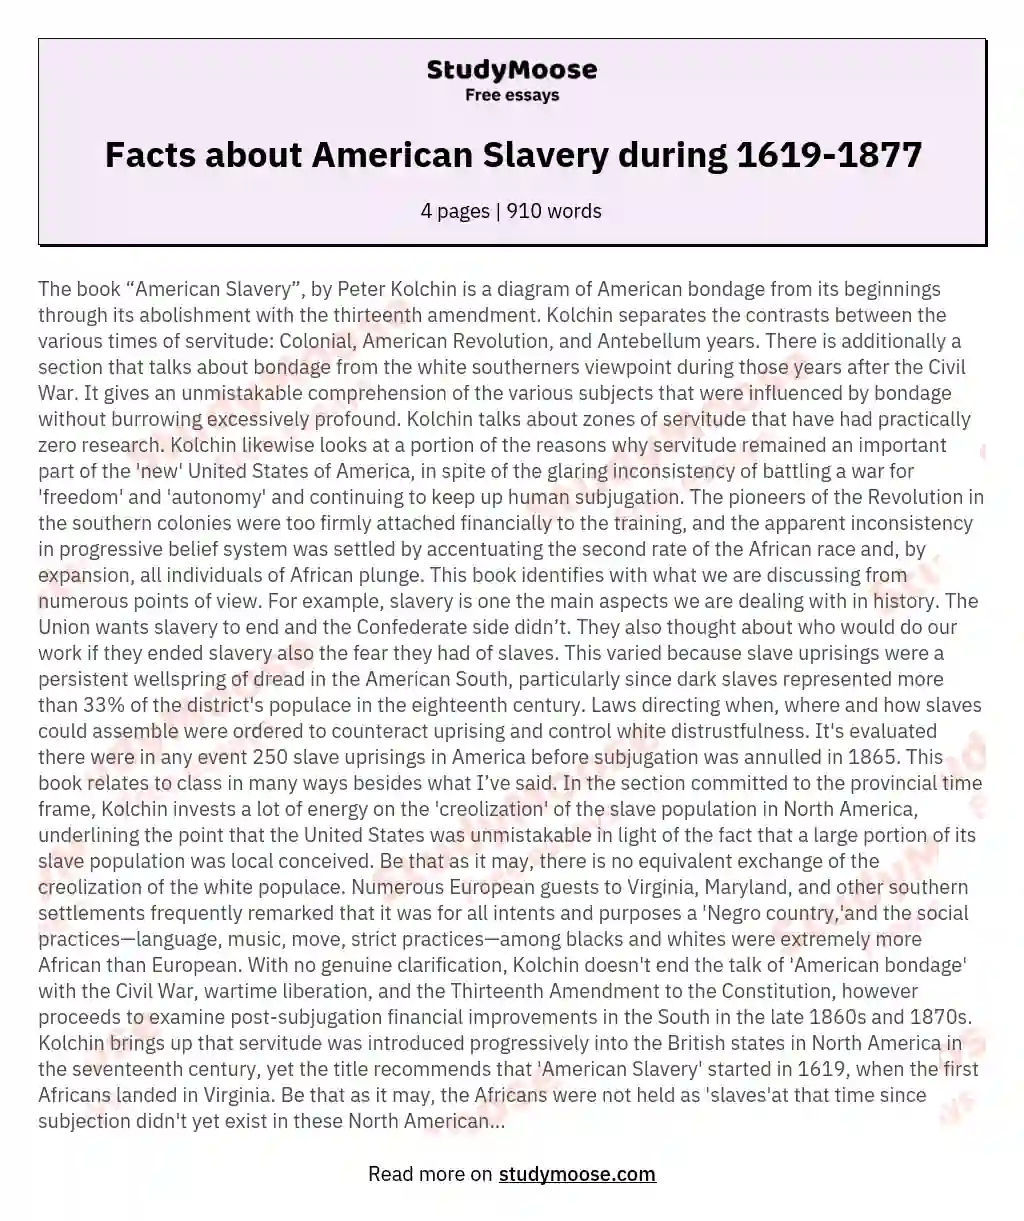 Facts about American Slavery during 1619-1877 essay